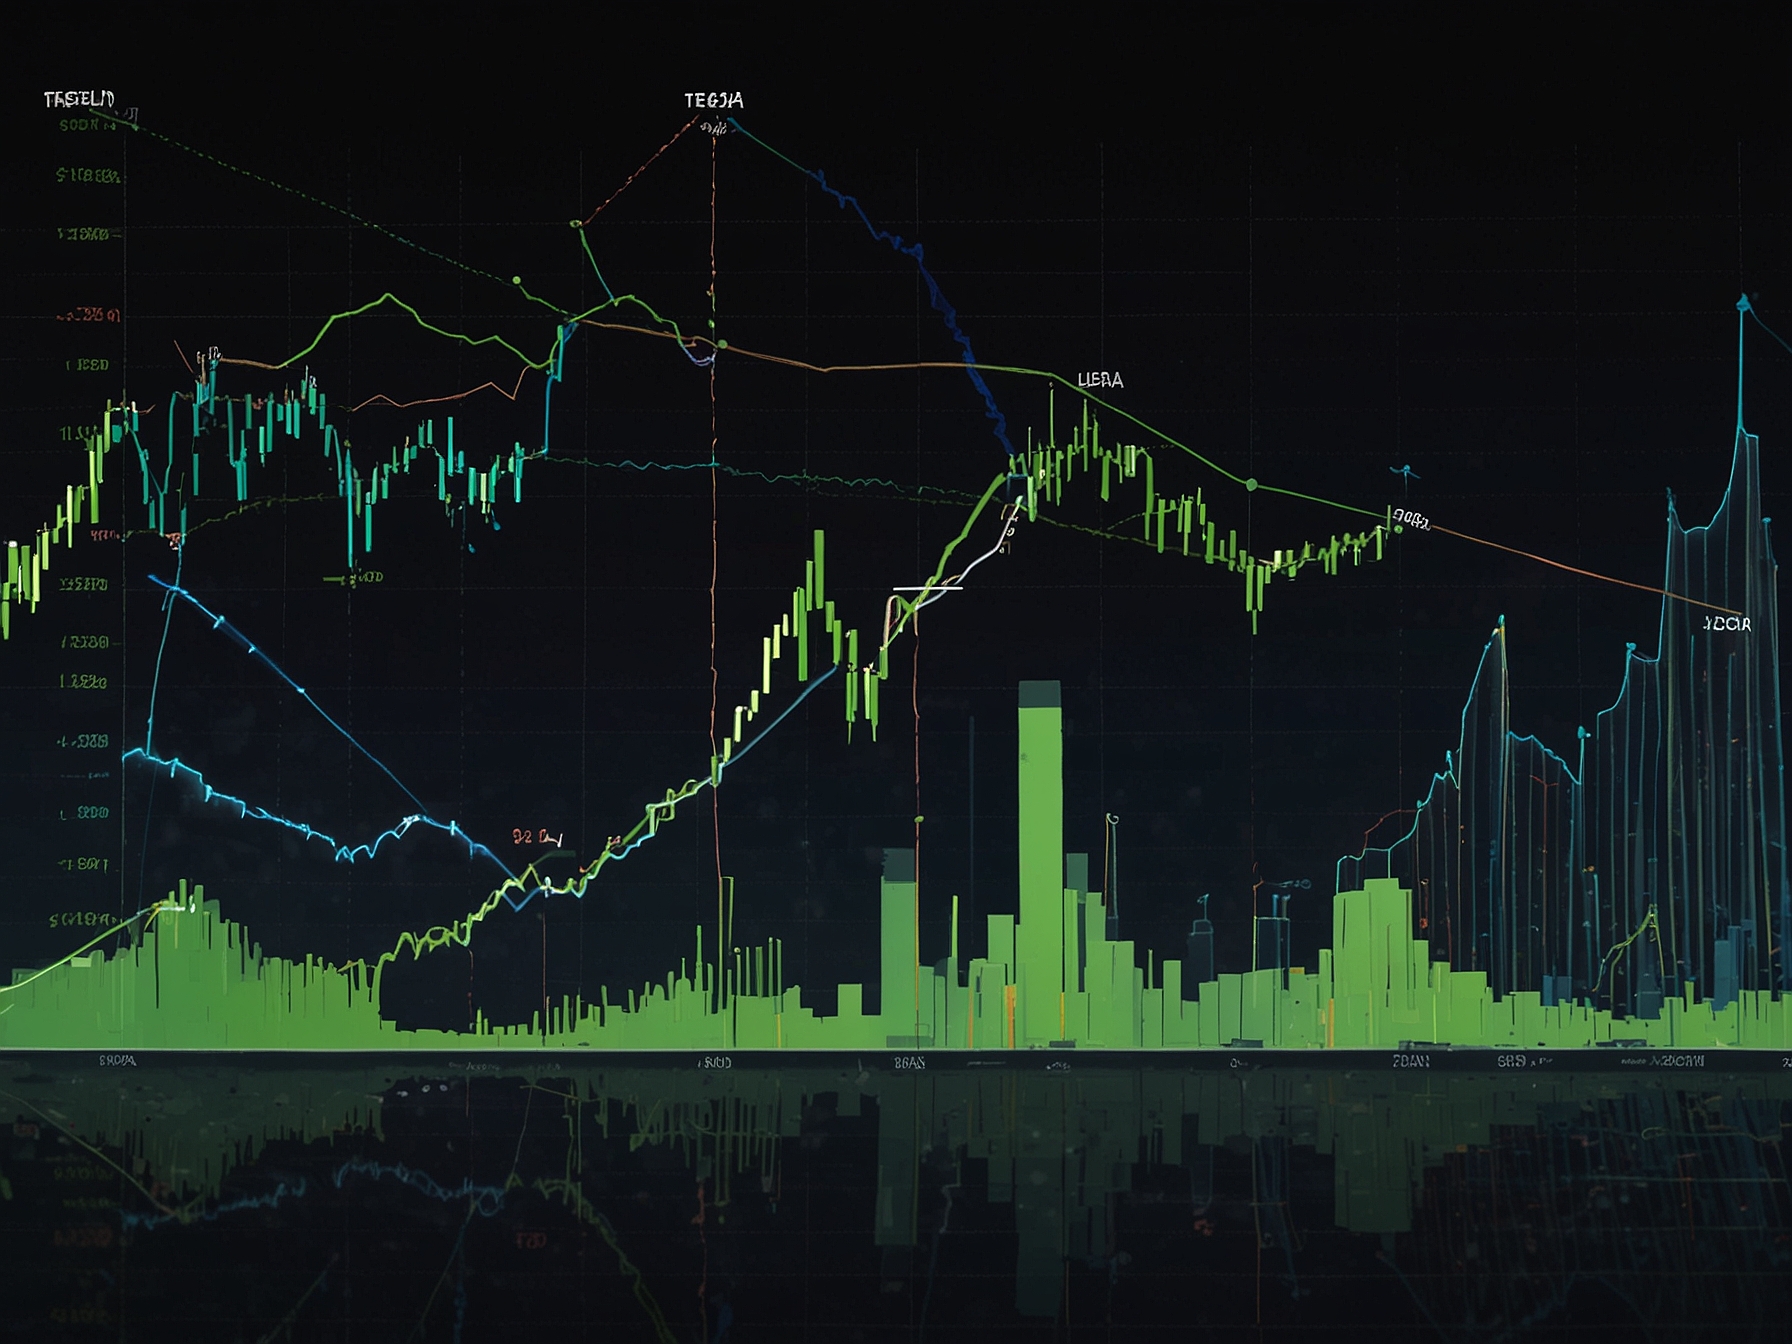 An upward graph showcasing the meteoric rise of Nvidia, Tesla, and Shopify stocks over the past decade, emphasizing their incredible growth due to AI advancements.